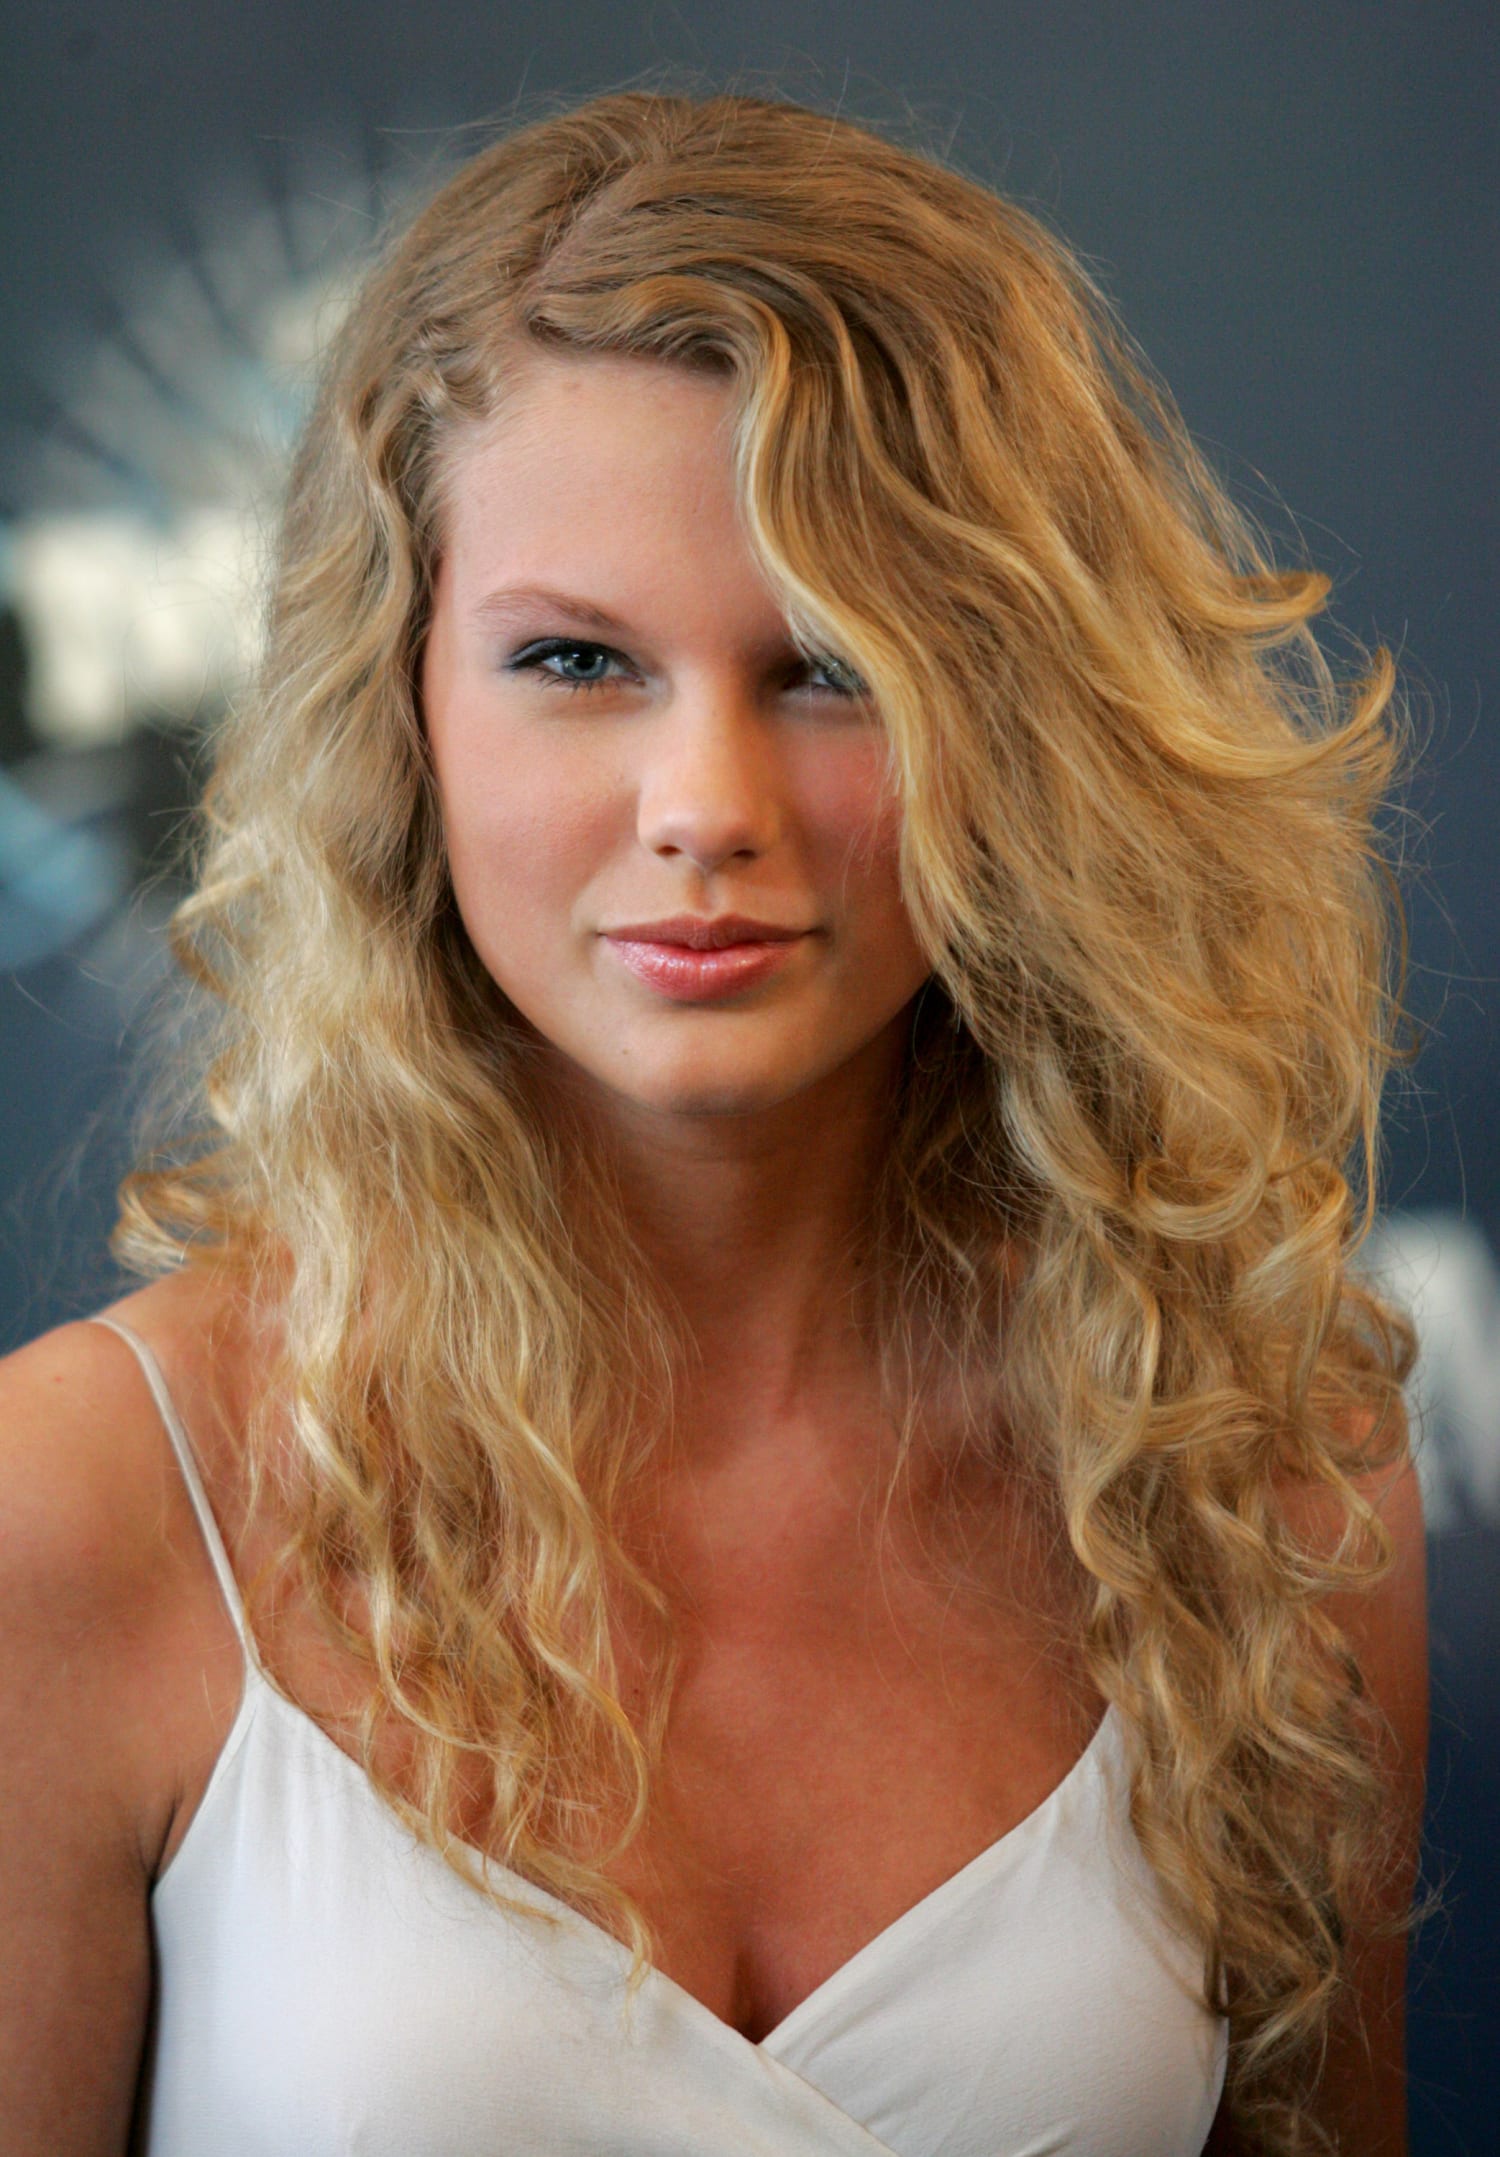 Taylor Swift is back and her natural curls are causing a sensation